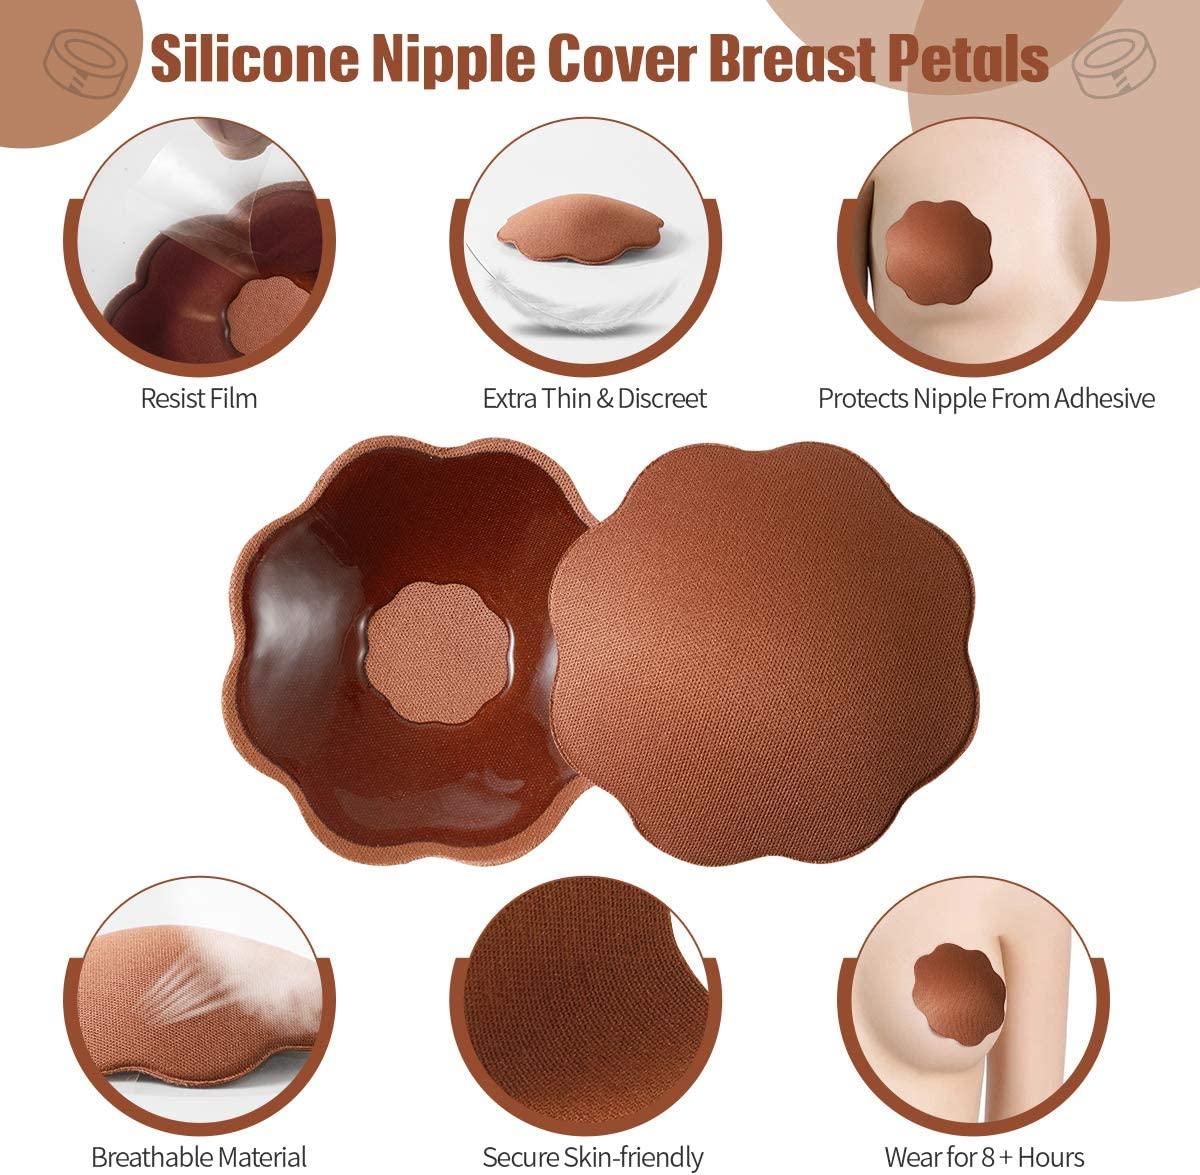 XL Breast Lift Tape for Large Breasts Breathable Boobytape for Breast Lift  Athletic Tape Body Tape with Reusable Nipplecover Adhesive Bra Brown